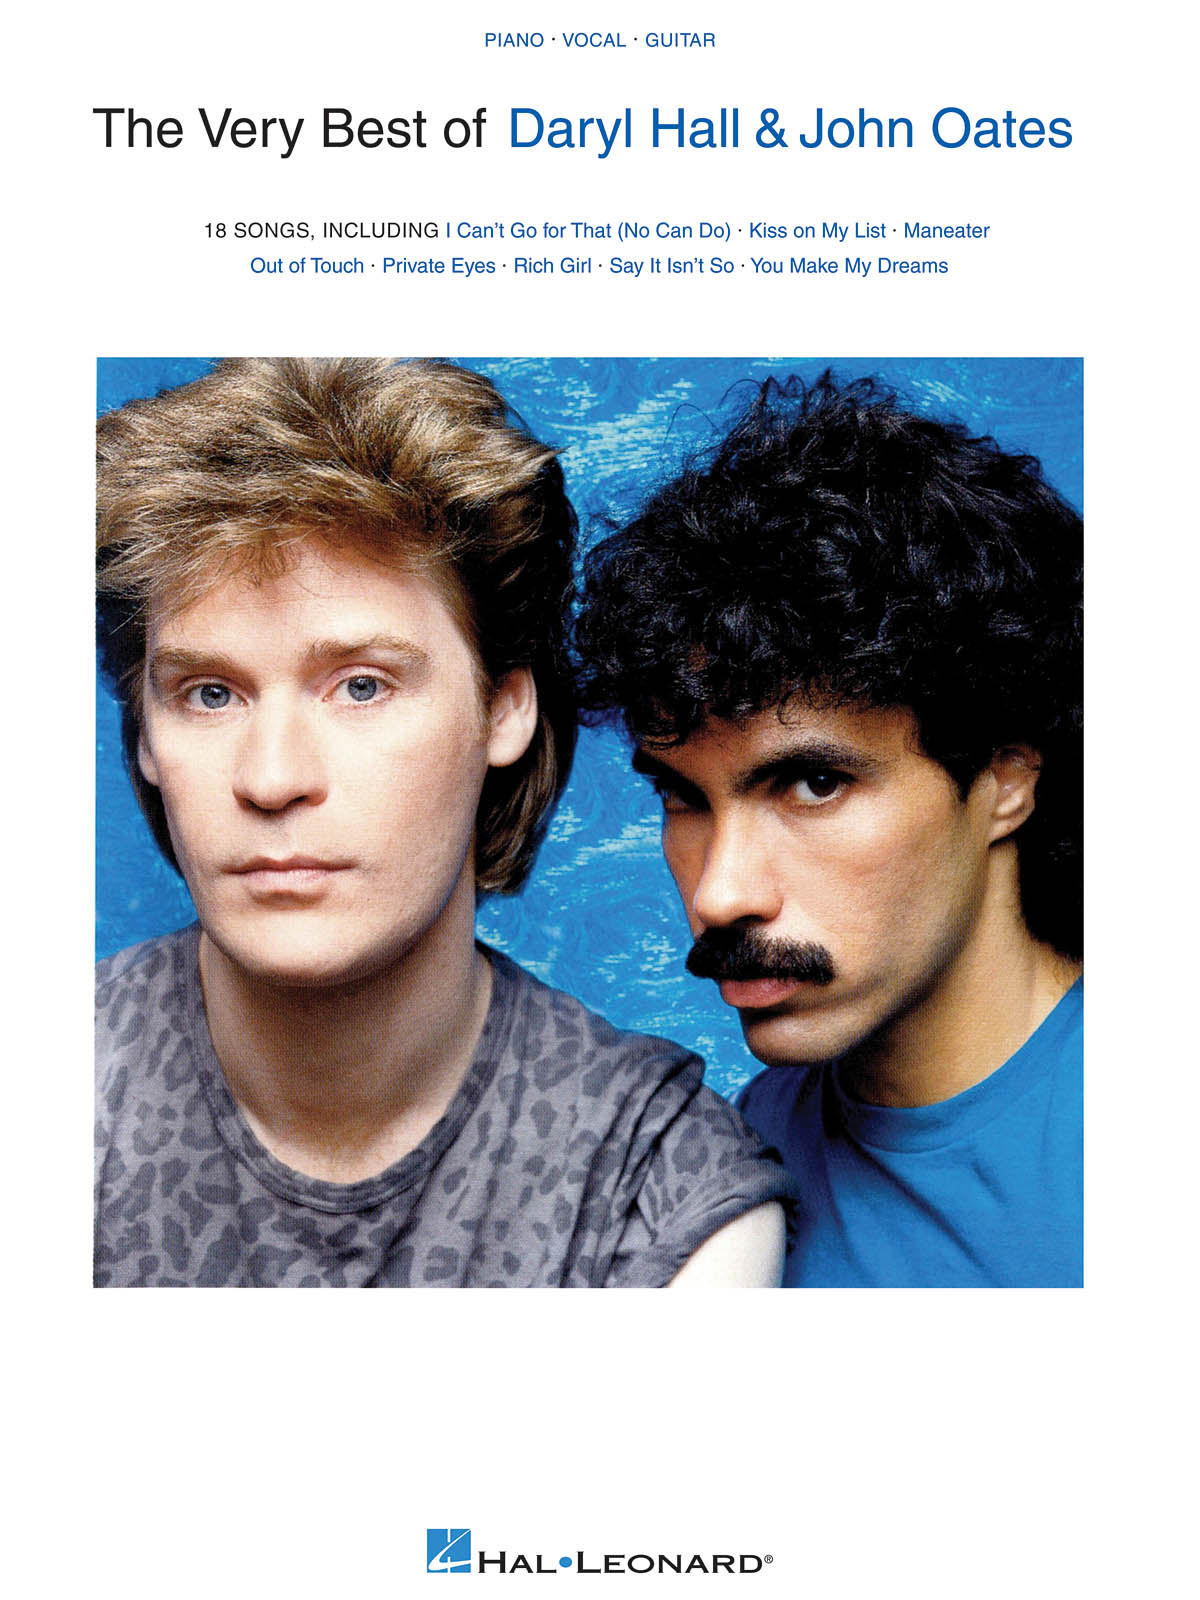 Daryl Hall: The Very Best of Daryl Hall & John Oates: Piano  Vocal and Guitar: